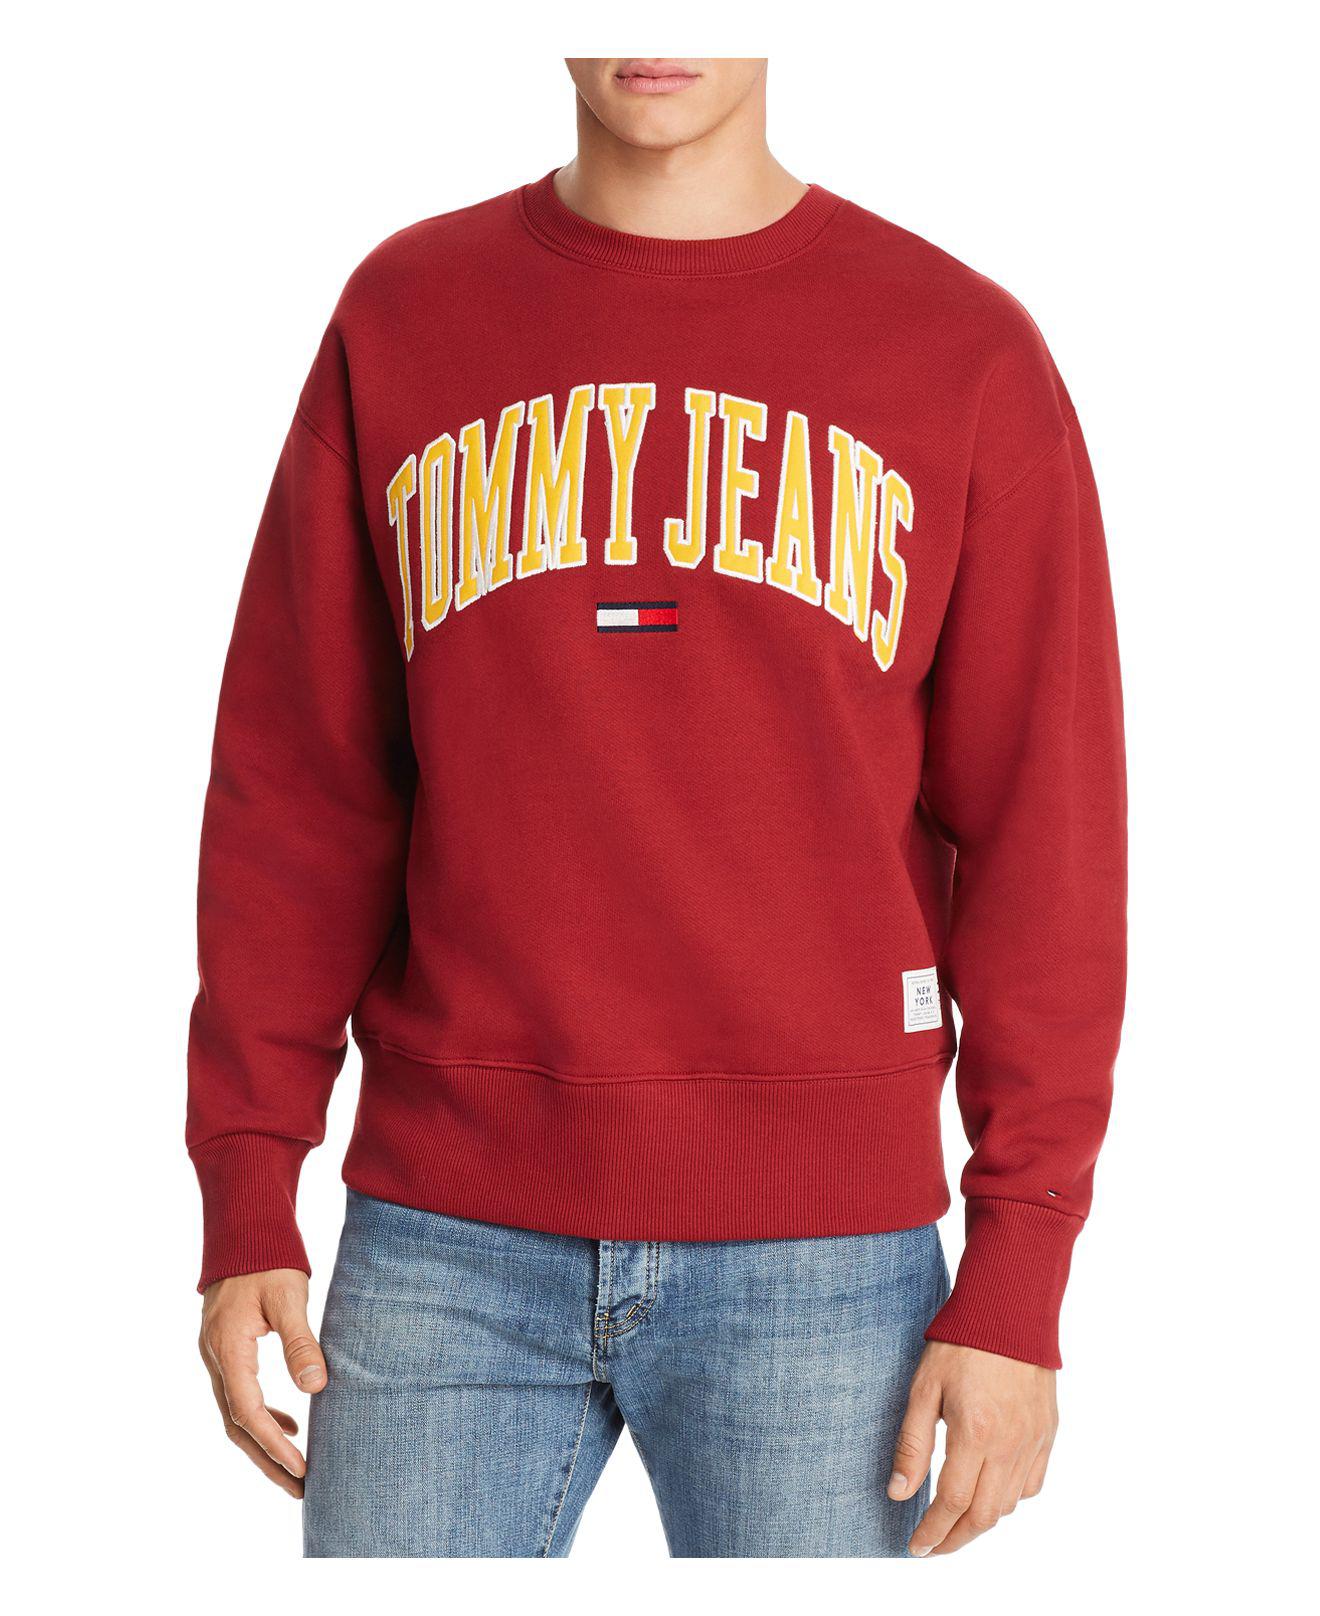 tommy jeans sweatshirt red for Sale OFF 68%